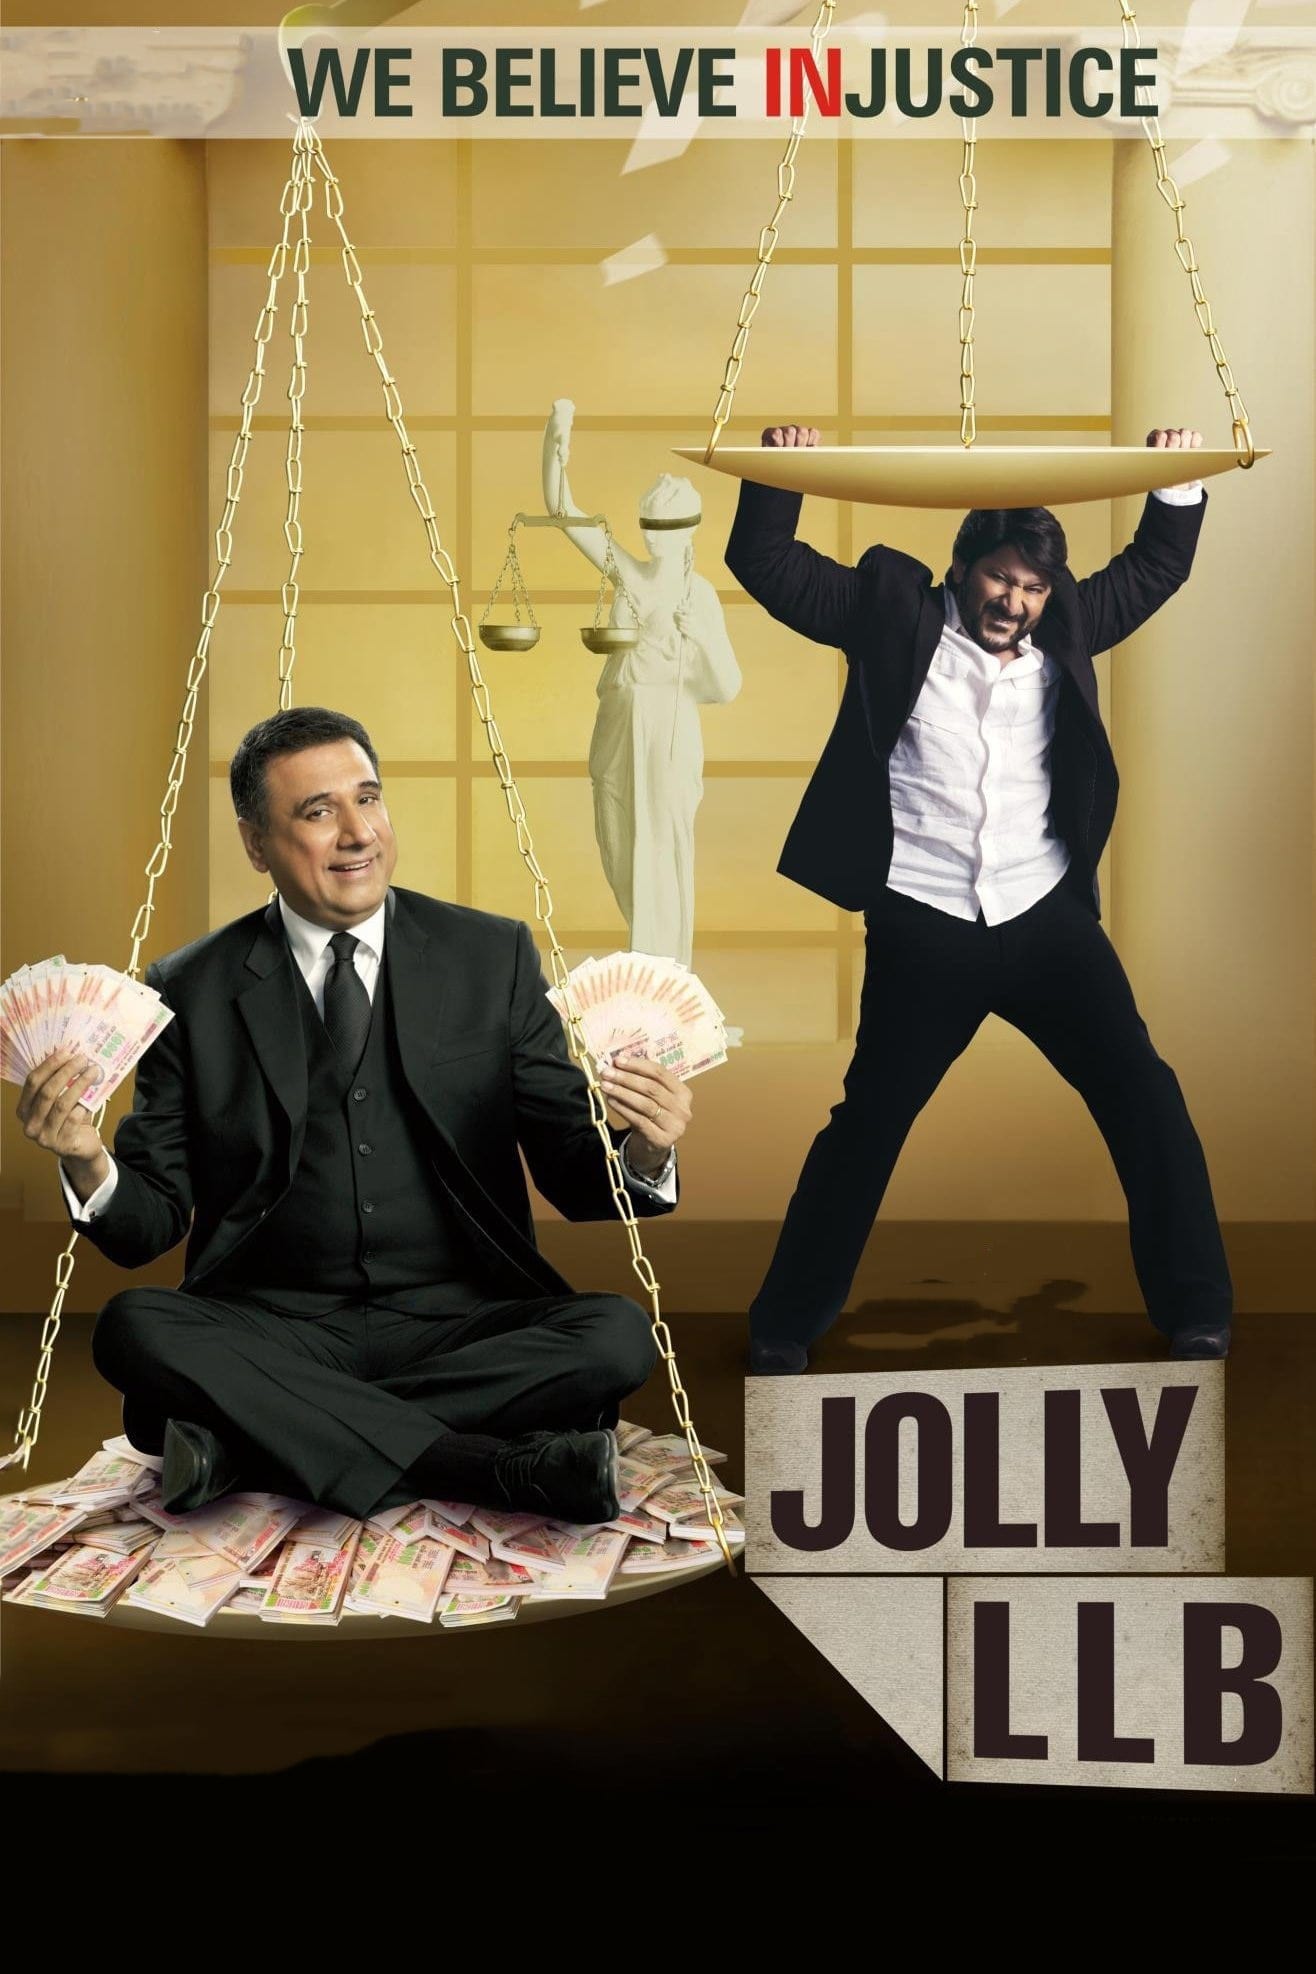 Poster for the movie "Jolly LLB"